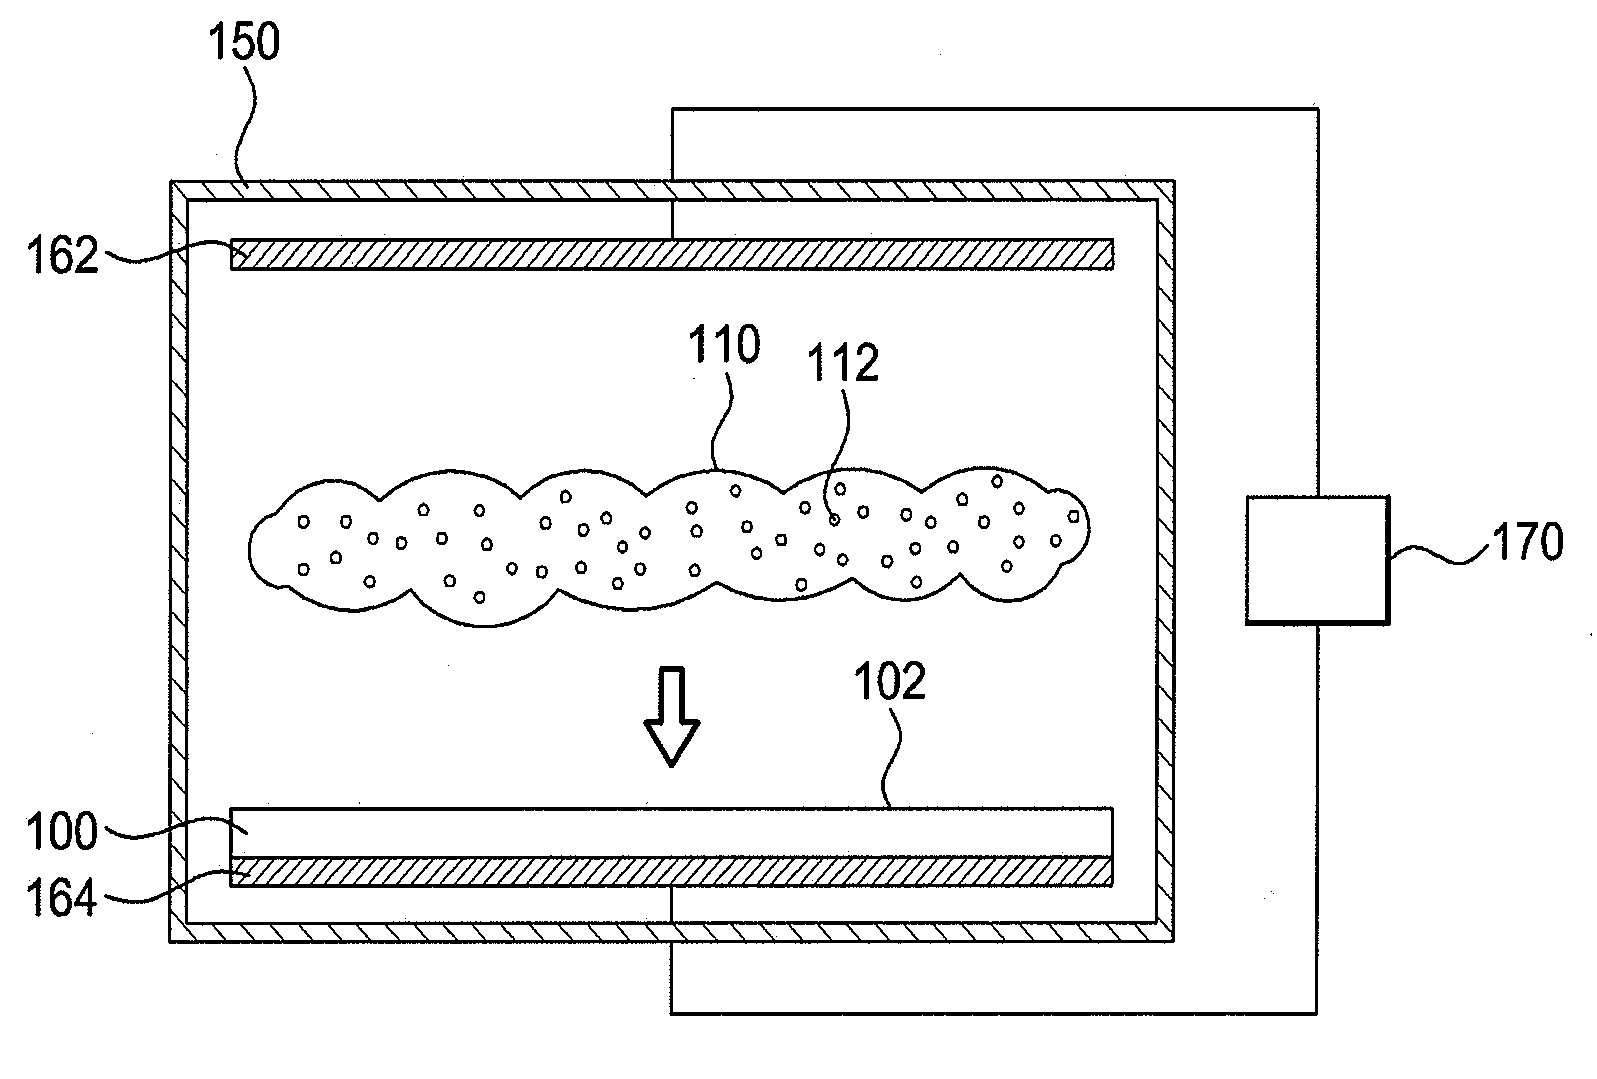 Nanowire layer adhesion on a substrate